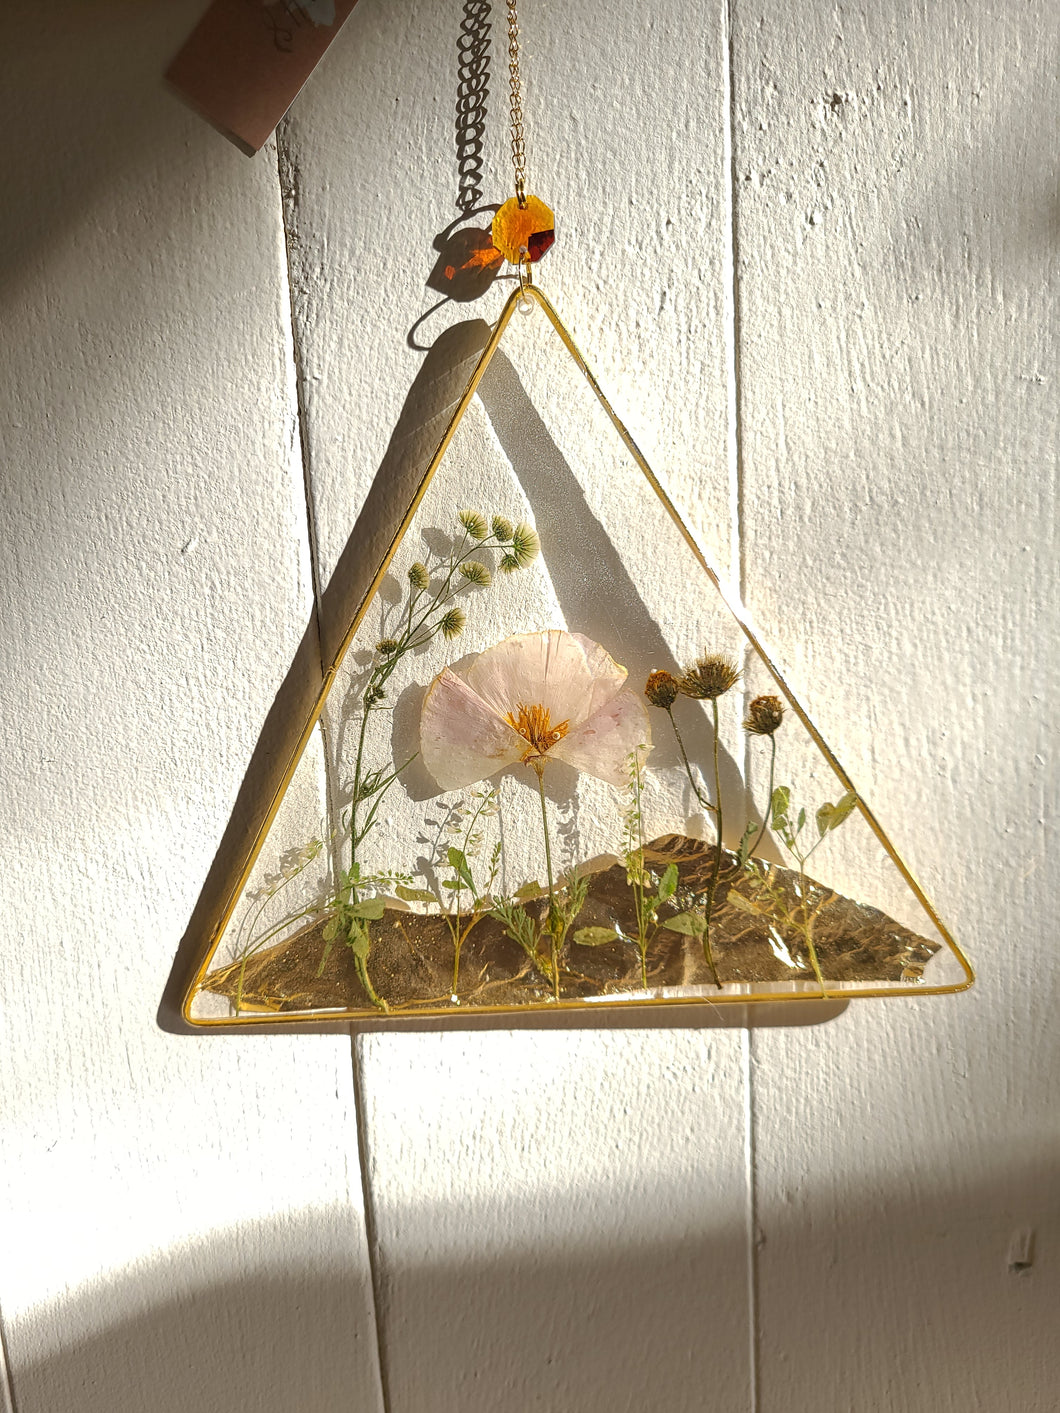 California Poppy Wall Hanging, Golden Triangle, Gold Mountains, Amber Gem